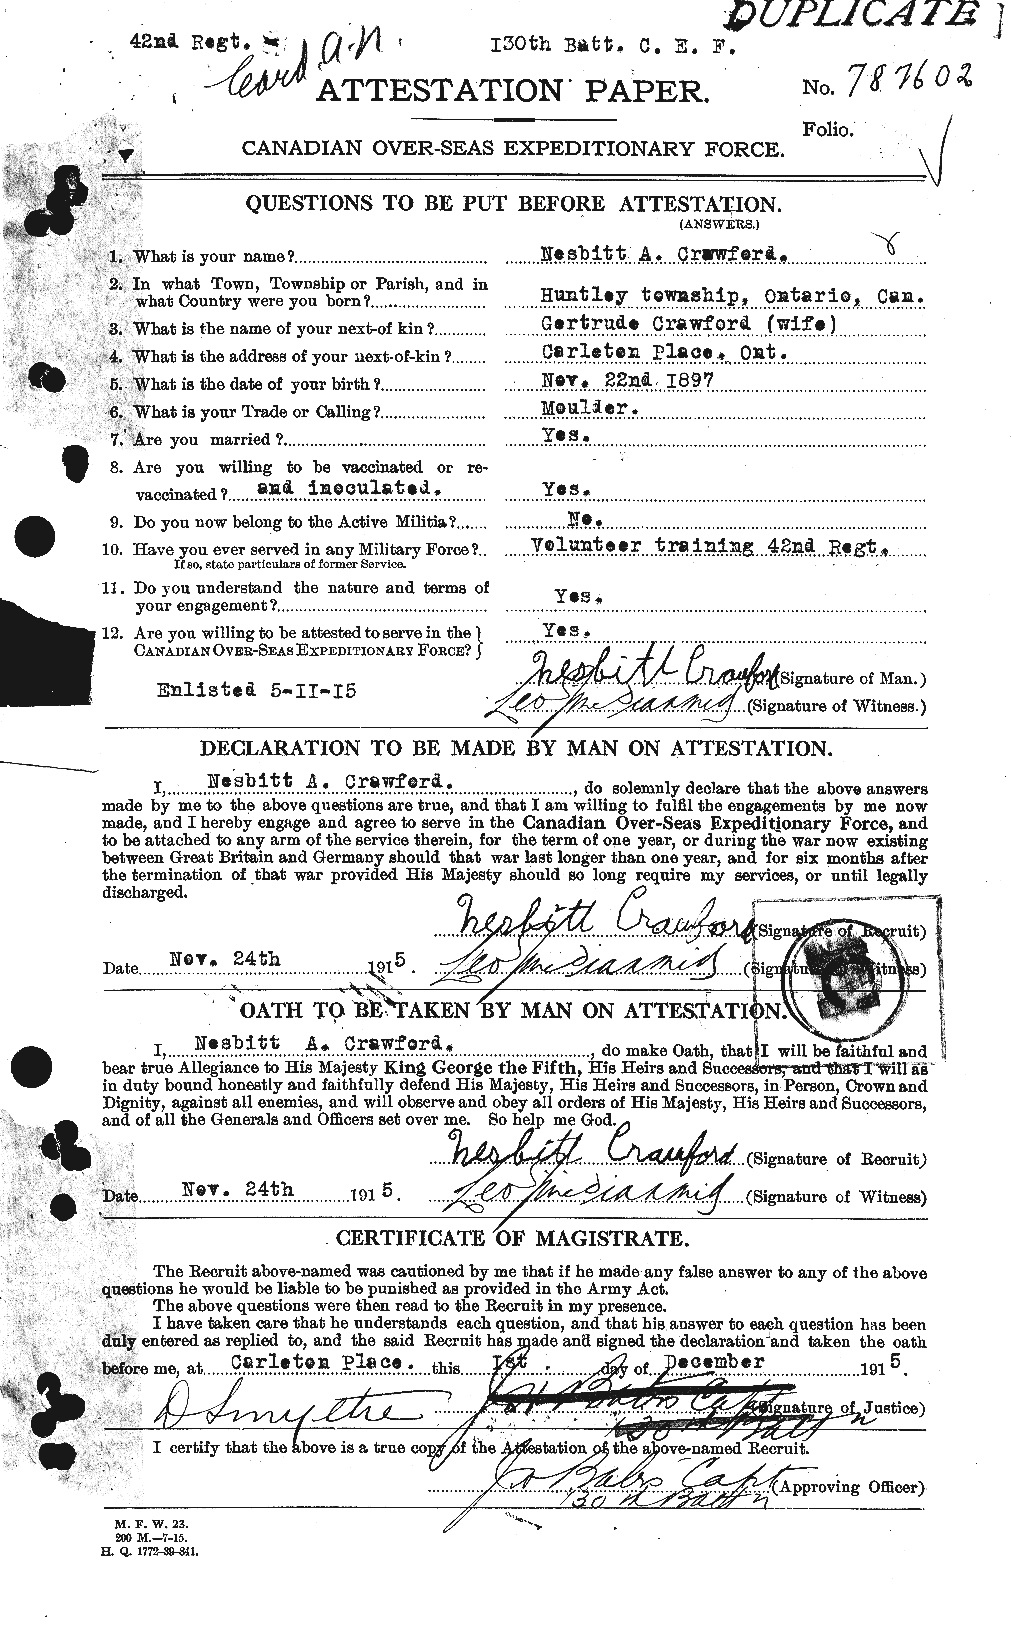 Personnel Records of the First World War - CEF 061663a